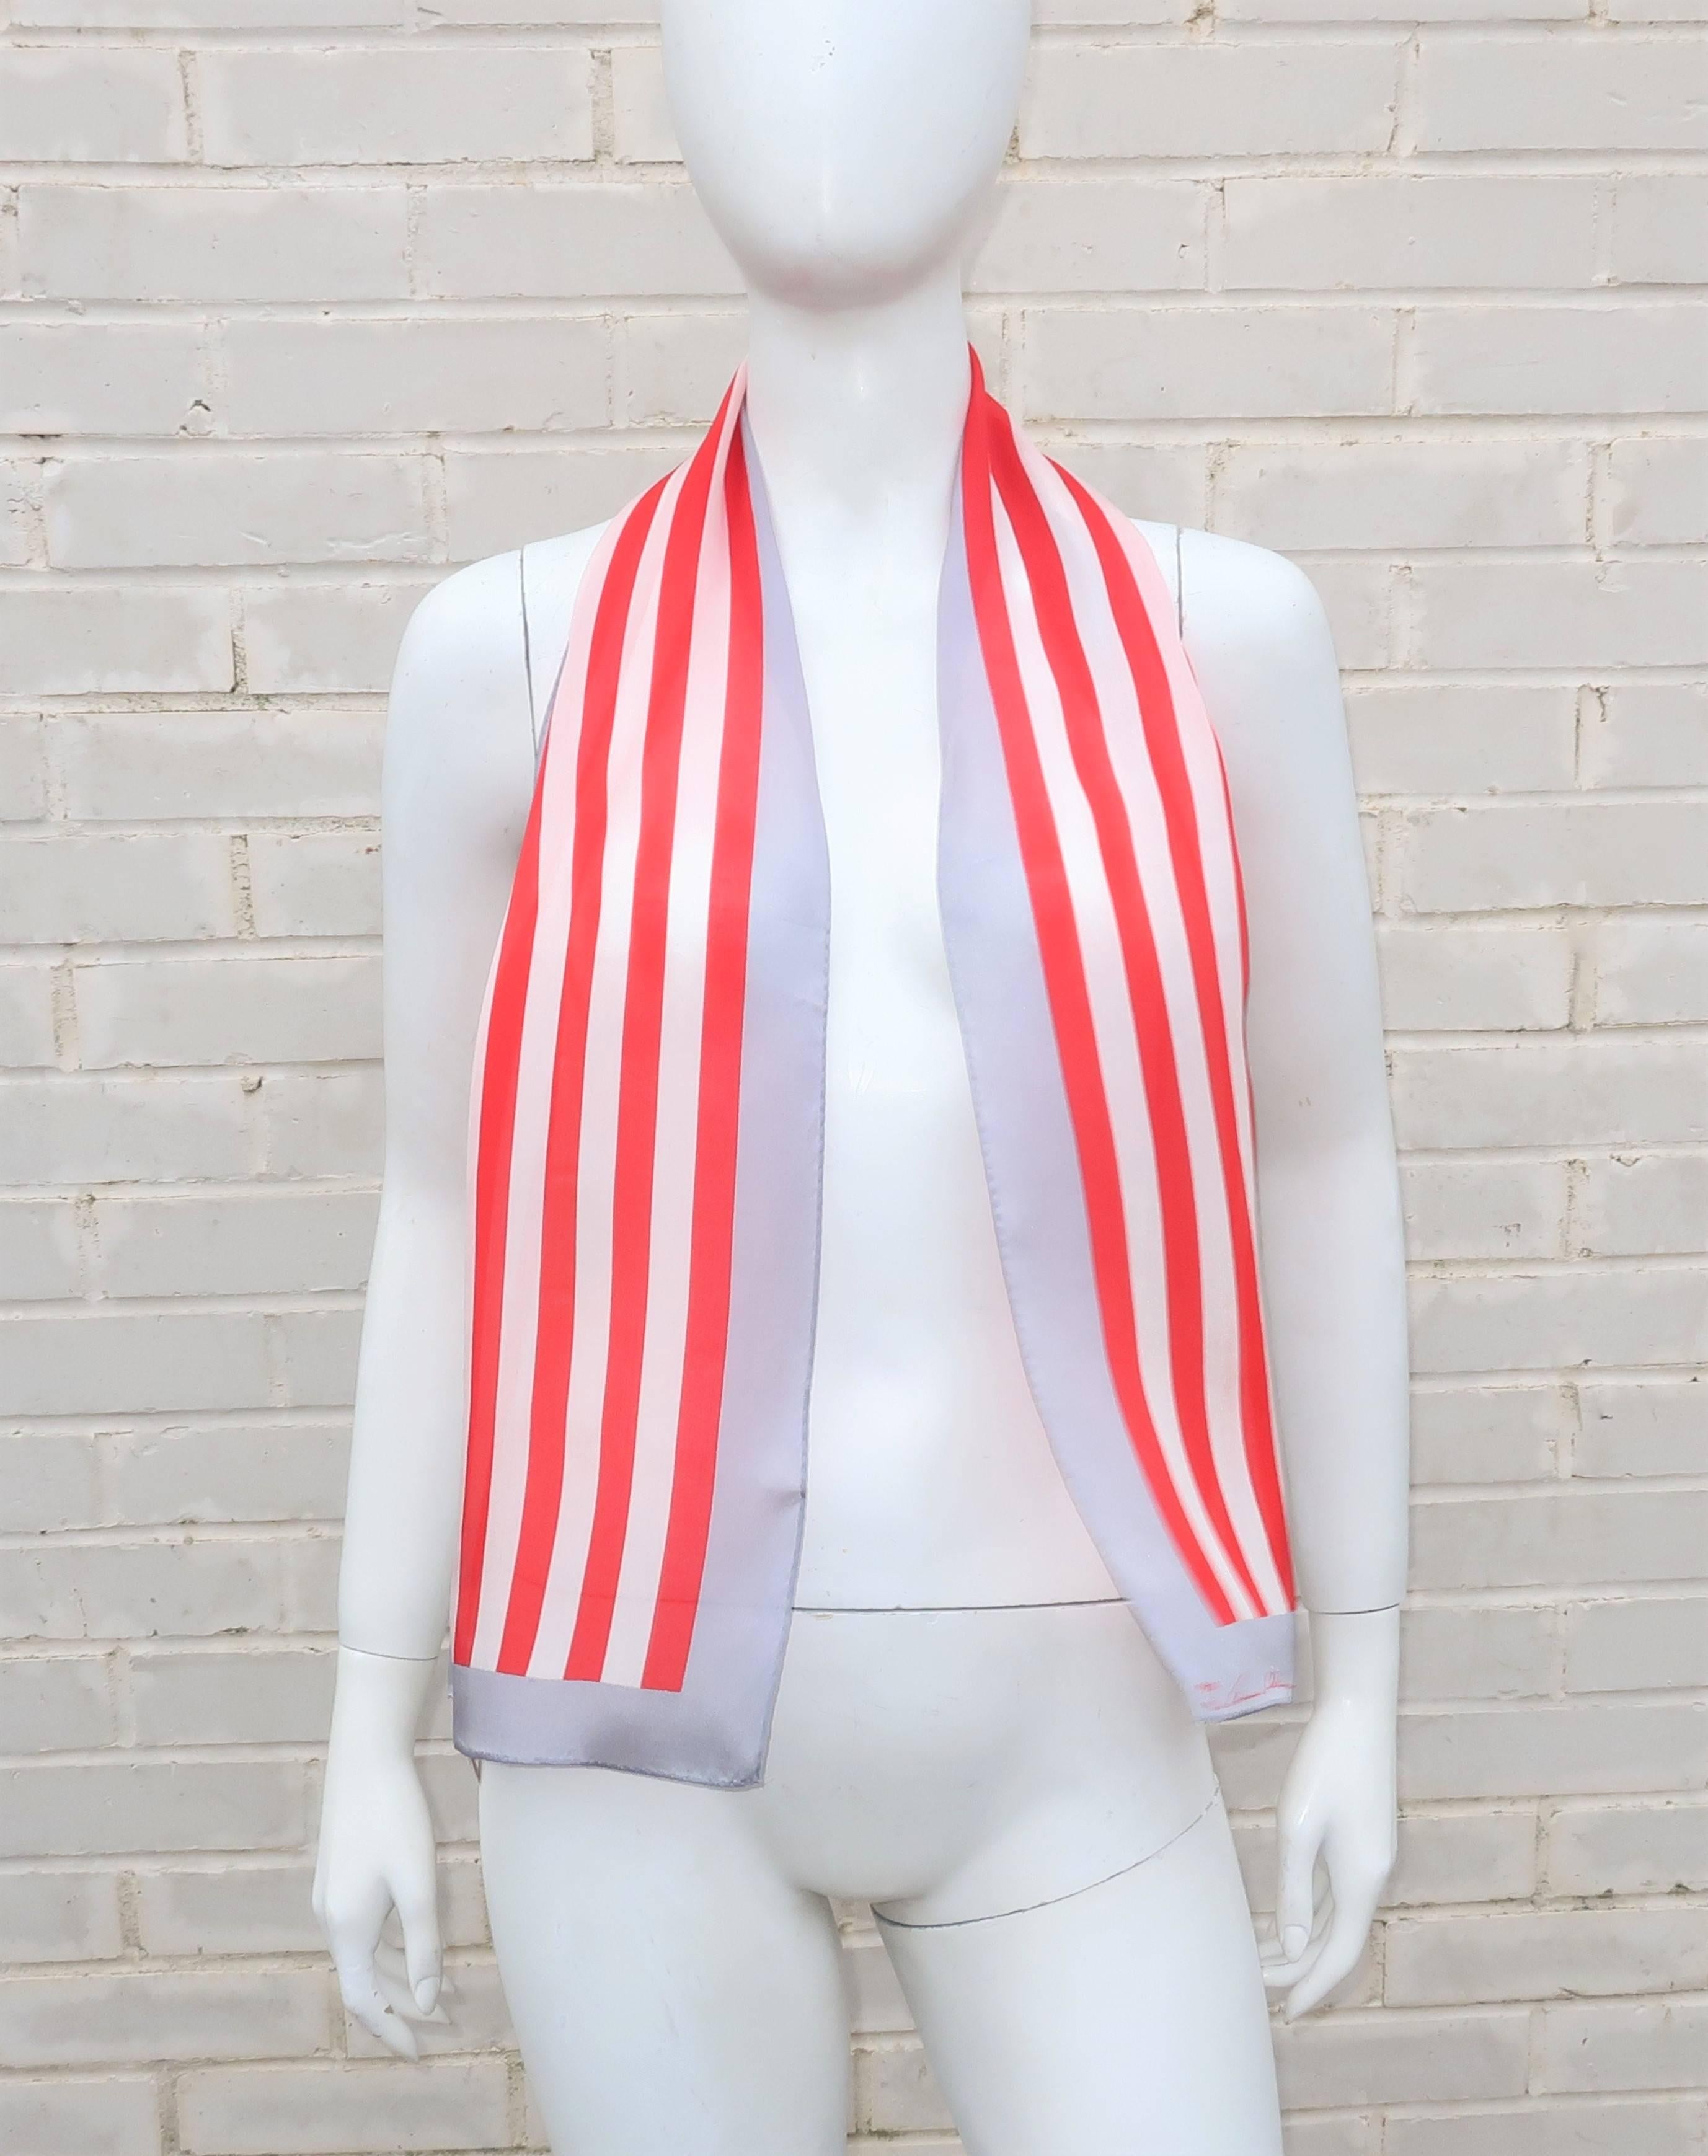 This wispy silk scarf combines two powerhouses of American fashion ... Anne Klein and the Vera Companies.  The vibrant fusion of candy cane red and white stripes is bordered by a dove gray band giving the extra long scarf an Americana feel. 